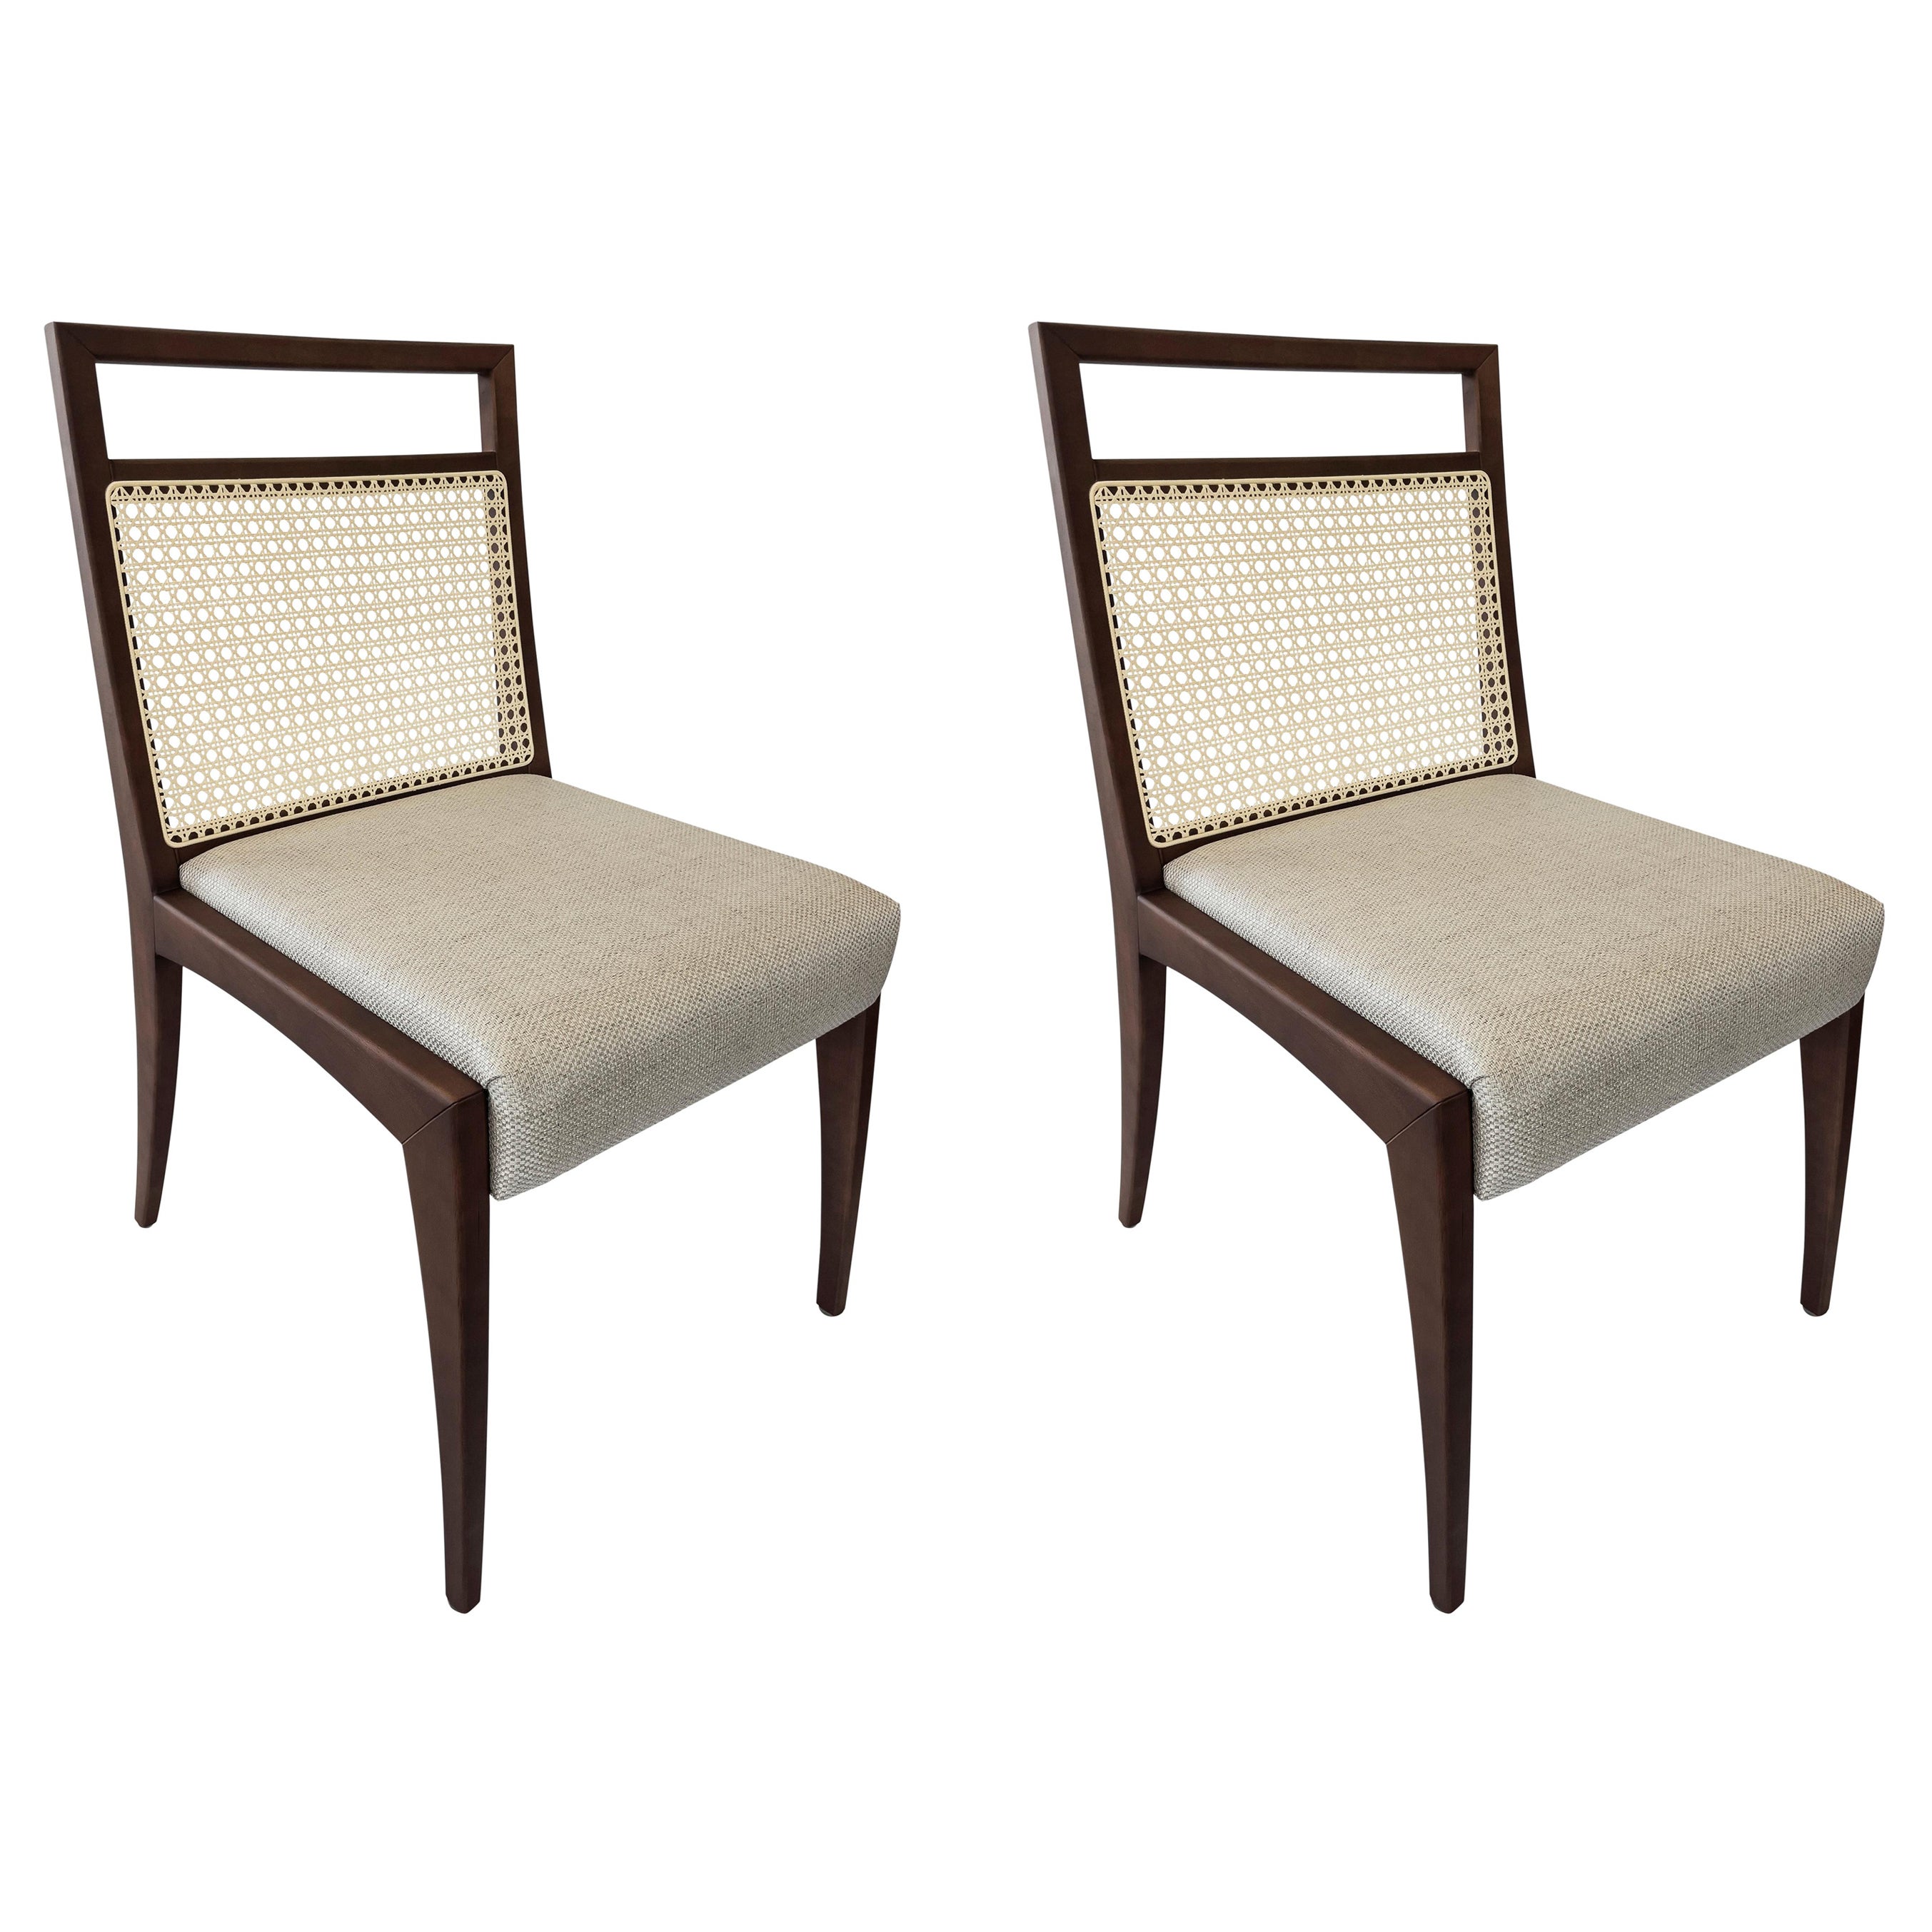 Sotto Cane-Back Dining Chair in Walnut Wood Finish with Oatmeal Fabric, Set of 2